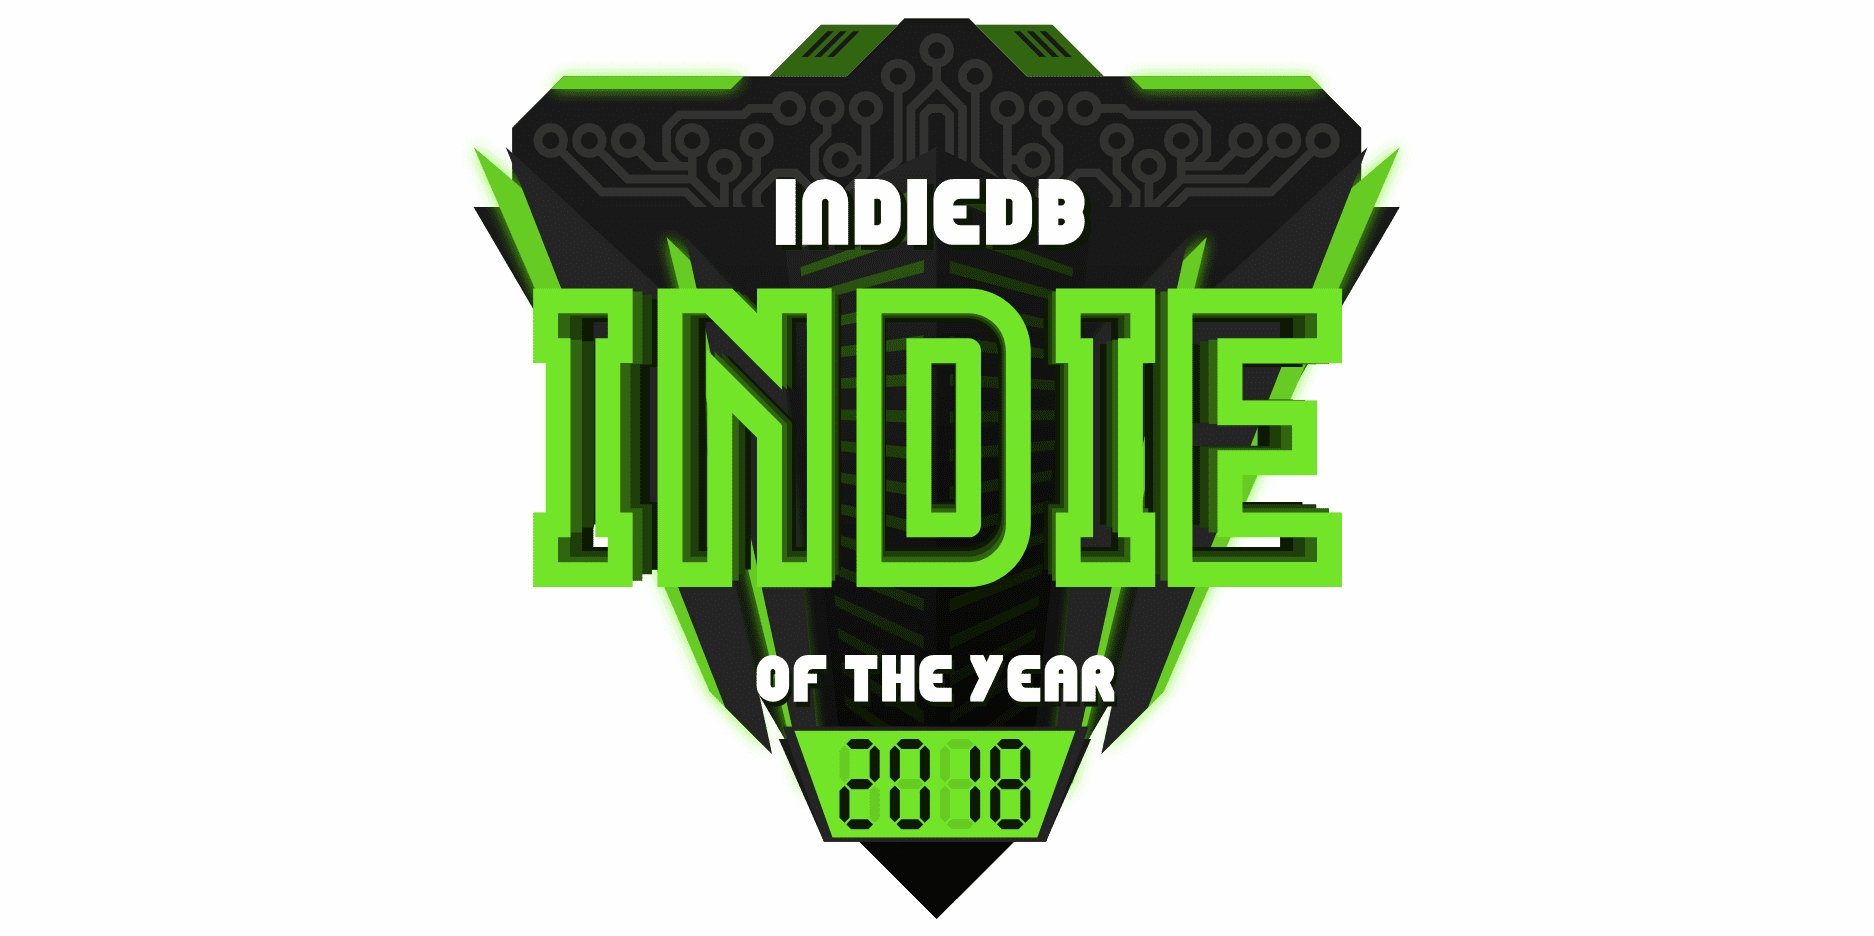 Voting for the 9th Annual ‘Indie of the Year’ awards kicks off